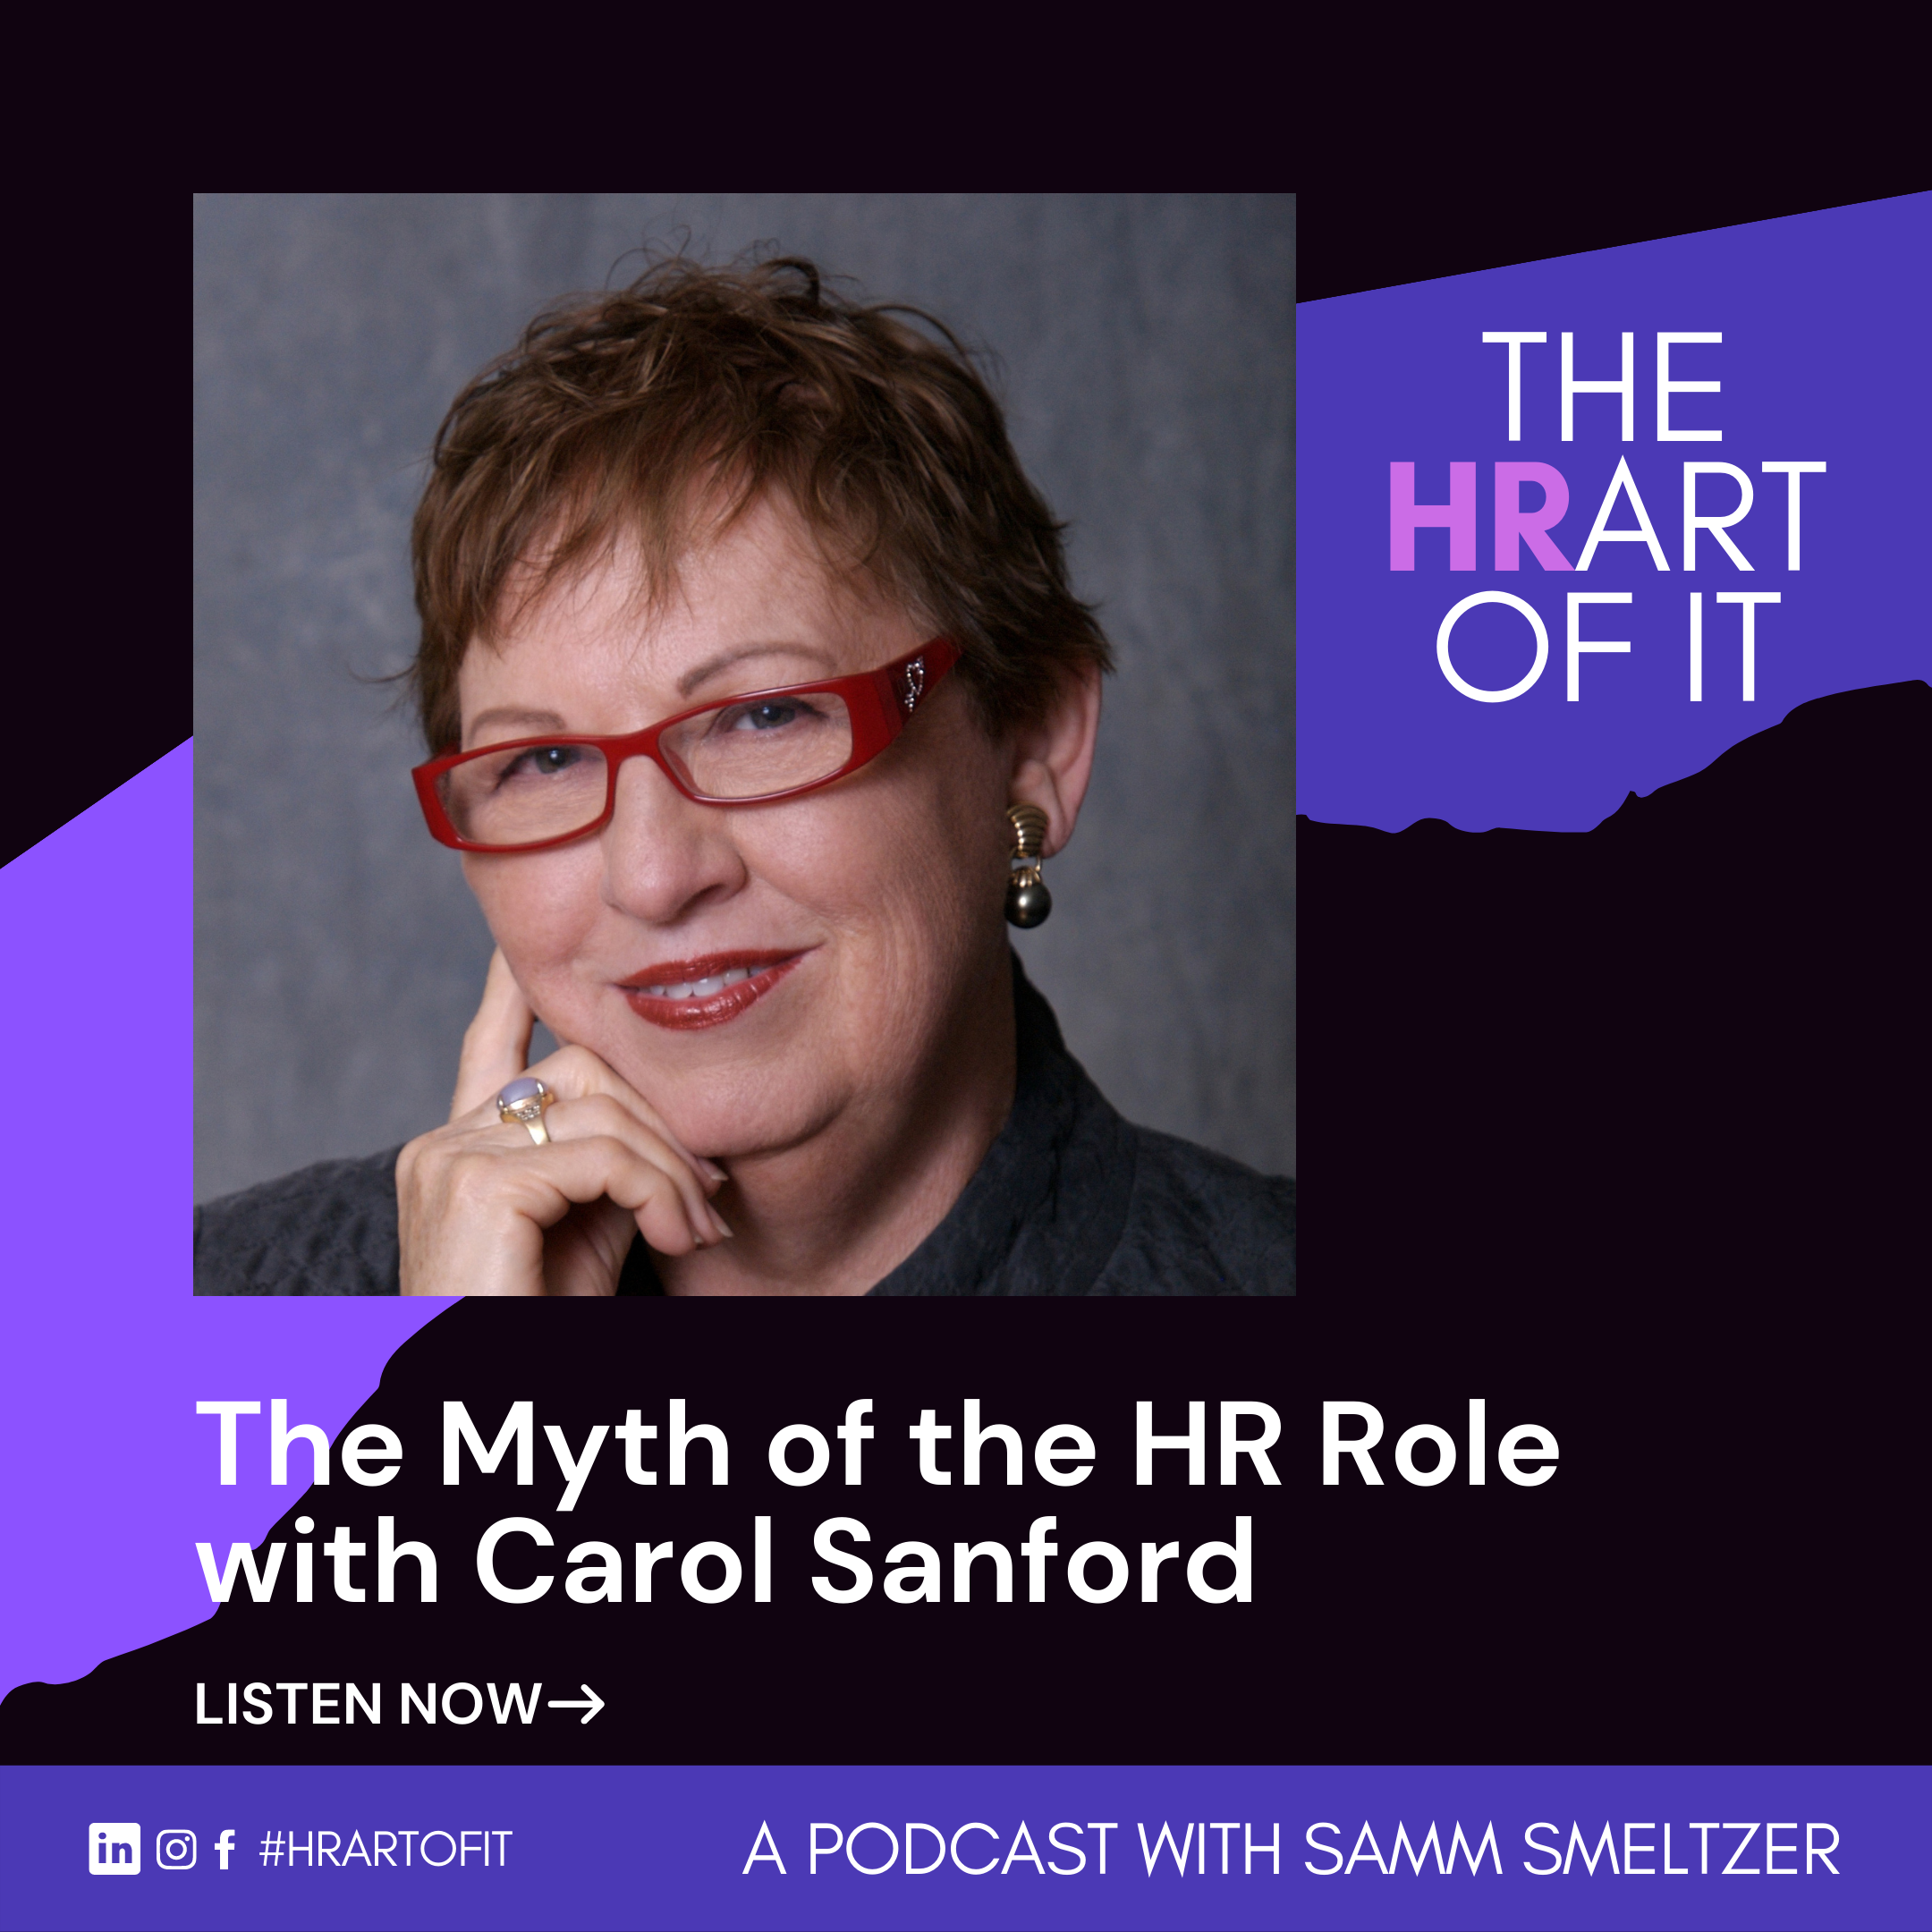 The Myth of the HR Role with Carol Sanford